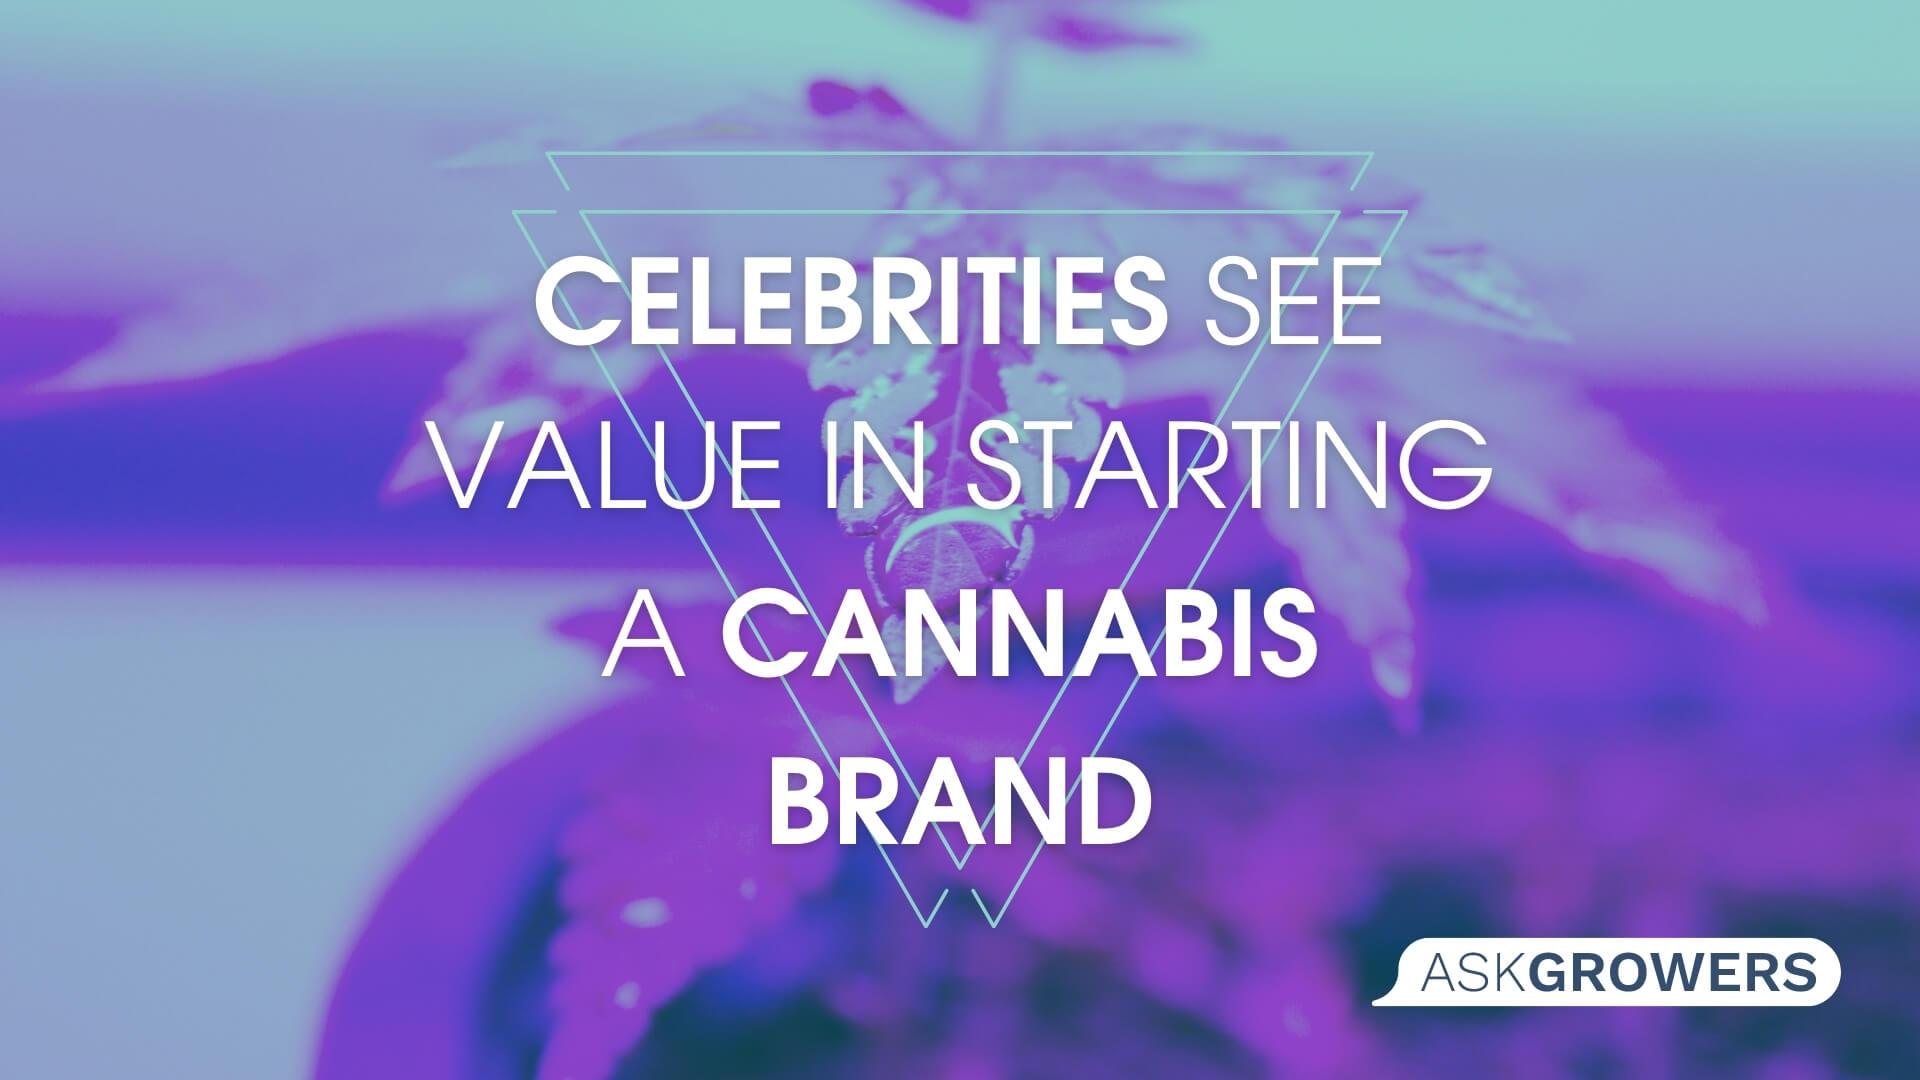 Why Do Celebrities See Value in Building Their Cannabis Brand?